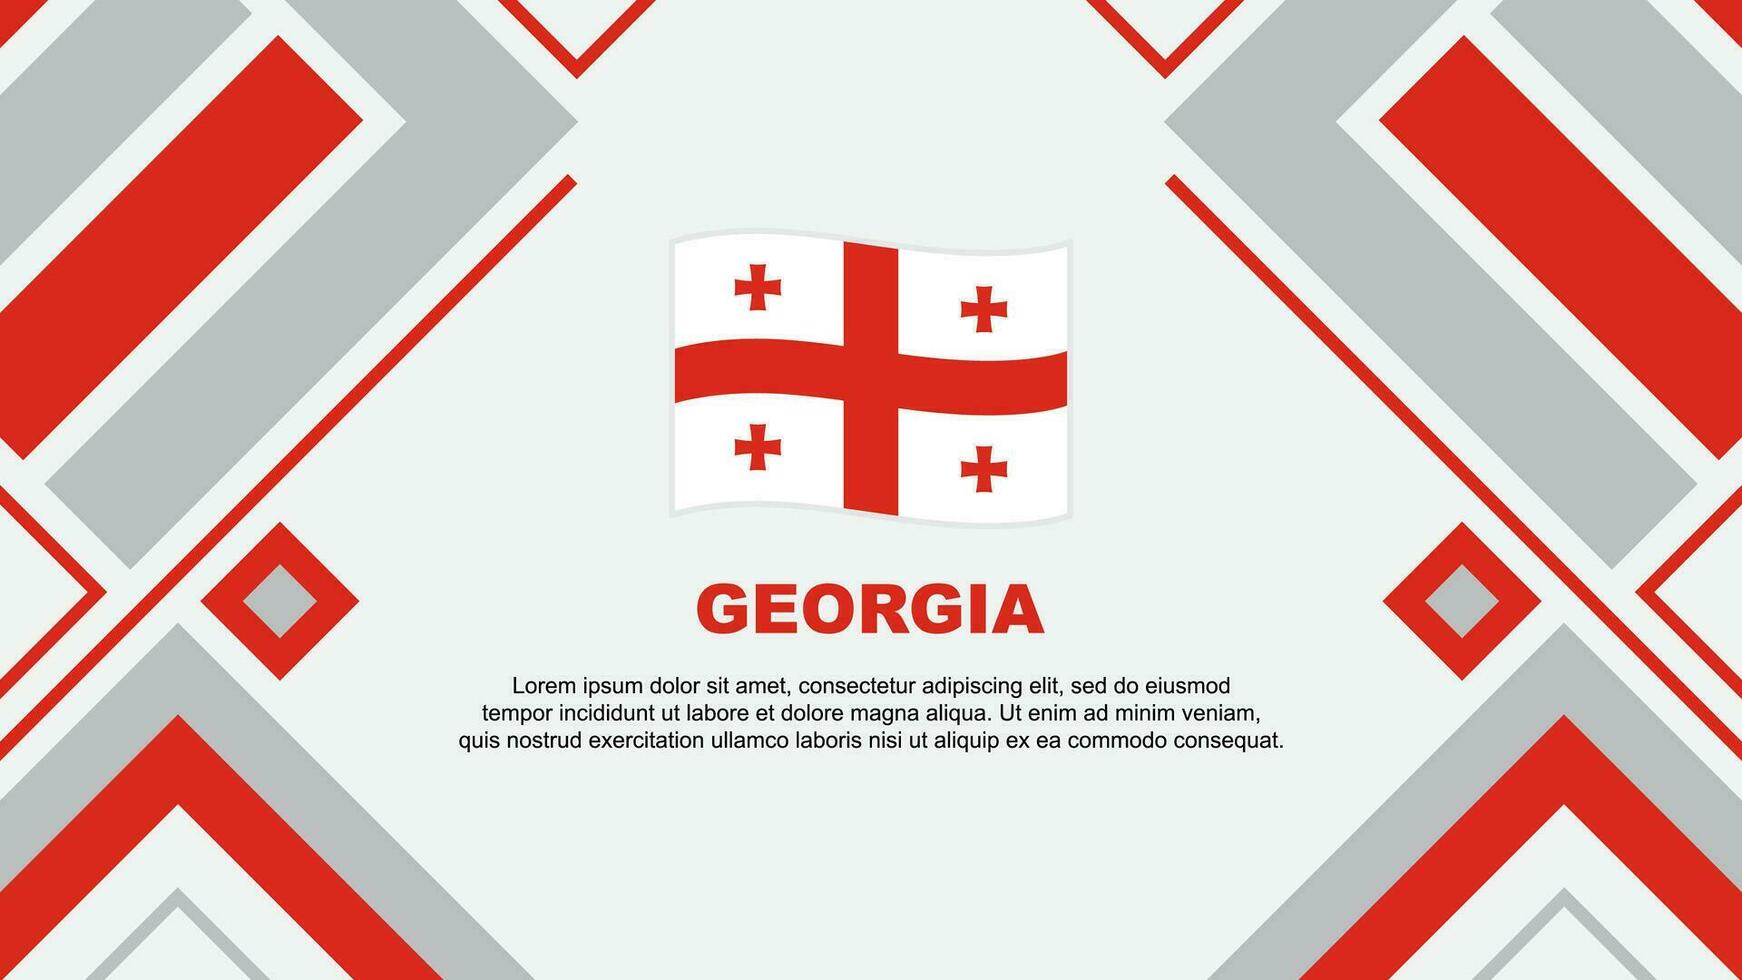 Georgia Flag Abstract Background Design Template. Georgia Independence Day Banner Wallpaper Vector Illustration. Georgia Flag